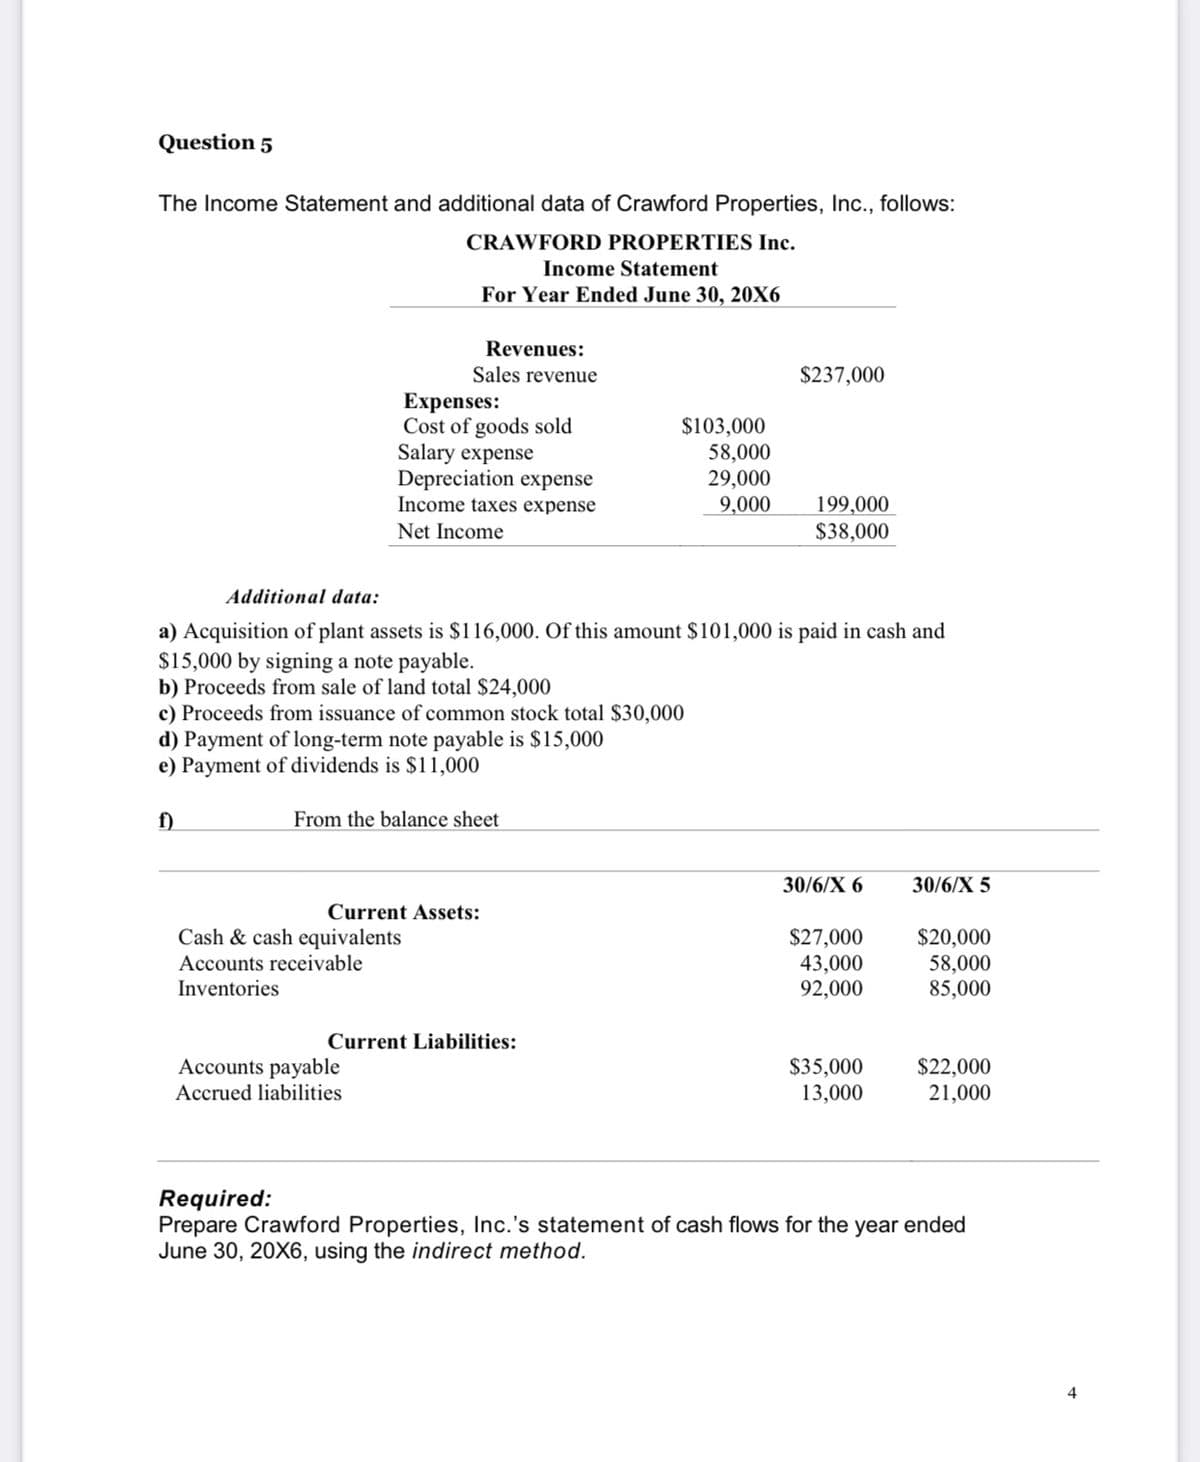 Question 5
The Income Statement and additional data of Crawford Properties, Inc., follows:
CRAWFORD PROPERTIES Inc.
Income Statement
For Year Ended June 30, 20X6
Revenues:
Sales revenue
$237,000
Еxpenses:
Cost of goods sold
Salary expense
Depreciation expense
Income taxes expense
$103,000
58,000
29,000
9,000
199,000
$38,000
Net Income
Additional data:
a) Acquisition of plant assets is $116,000. Of this amount $101,000 is paid in cash and
$15,000 by signing a note payable.
b) Proceeds from sale of land total $24,000
c) Proceeds from issuance of common stock total $30,000
d) Payment of long-term note payable is $15,000
e) Payment of dividends is $11,000
f)
From the balance sheet
30/6/X 6
30/6/X 5
Current Assets:
Cash & cash equivalents
Accounts receivable
Inventories
$27,000
43,000
92,000
$20,000
58,000
85,000
Current Liabilities:
Accounts payable
Accrued liabilities
$35,000
13,000
$22,000
21,000
Required:
Prepare Crawford Properties, Inc.'s statement of cash flows for the year ended
June 30, 20X6, using the indirect method.
4
